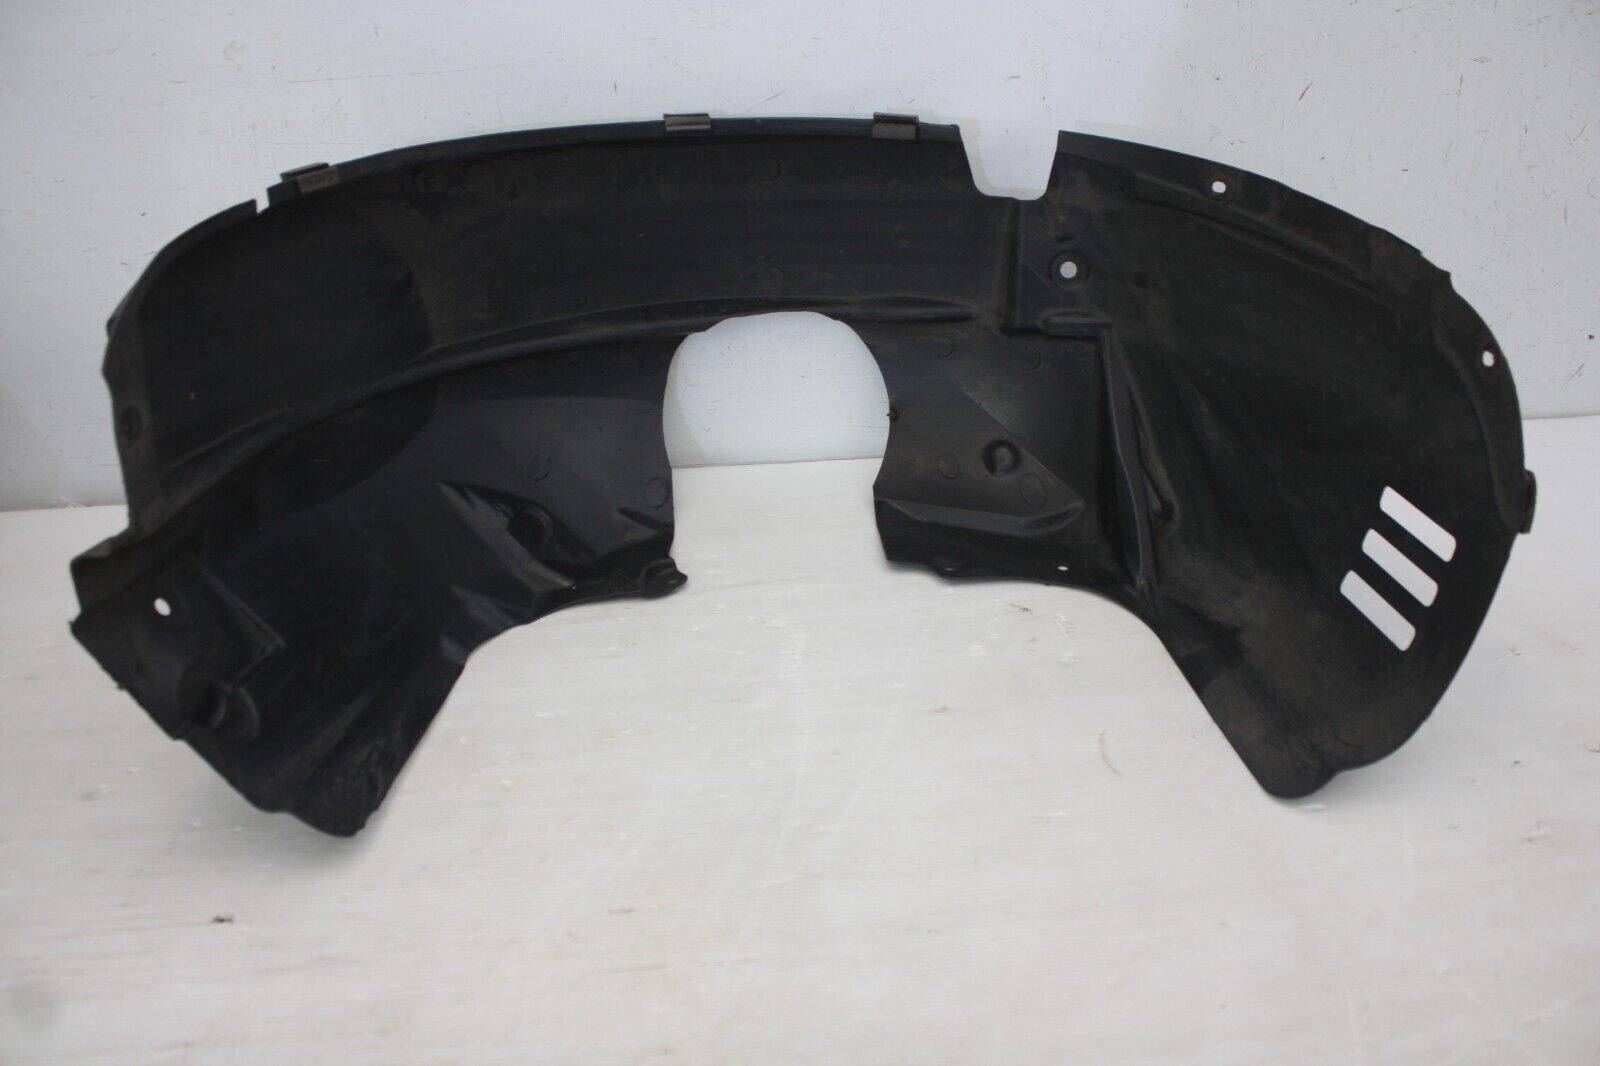 Ford-Fiesta-Front-Right-Side-Wheel-Liner-Splash-Guard-2008-to-2012-8A61-16114-B-175656992480-10